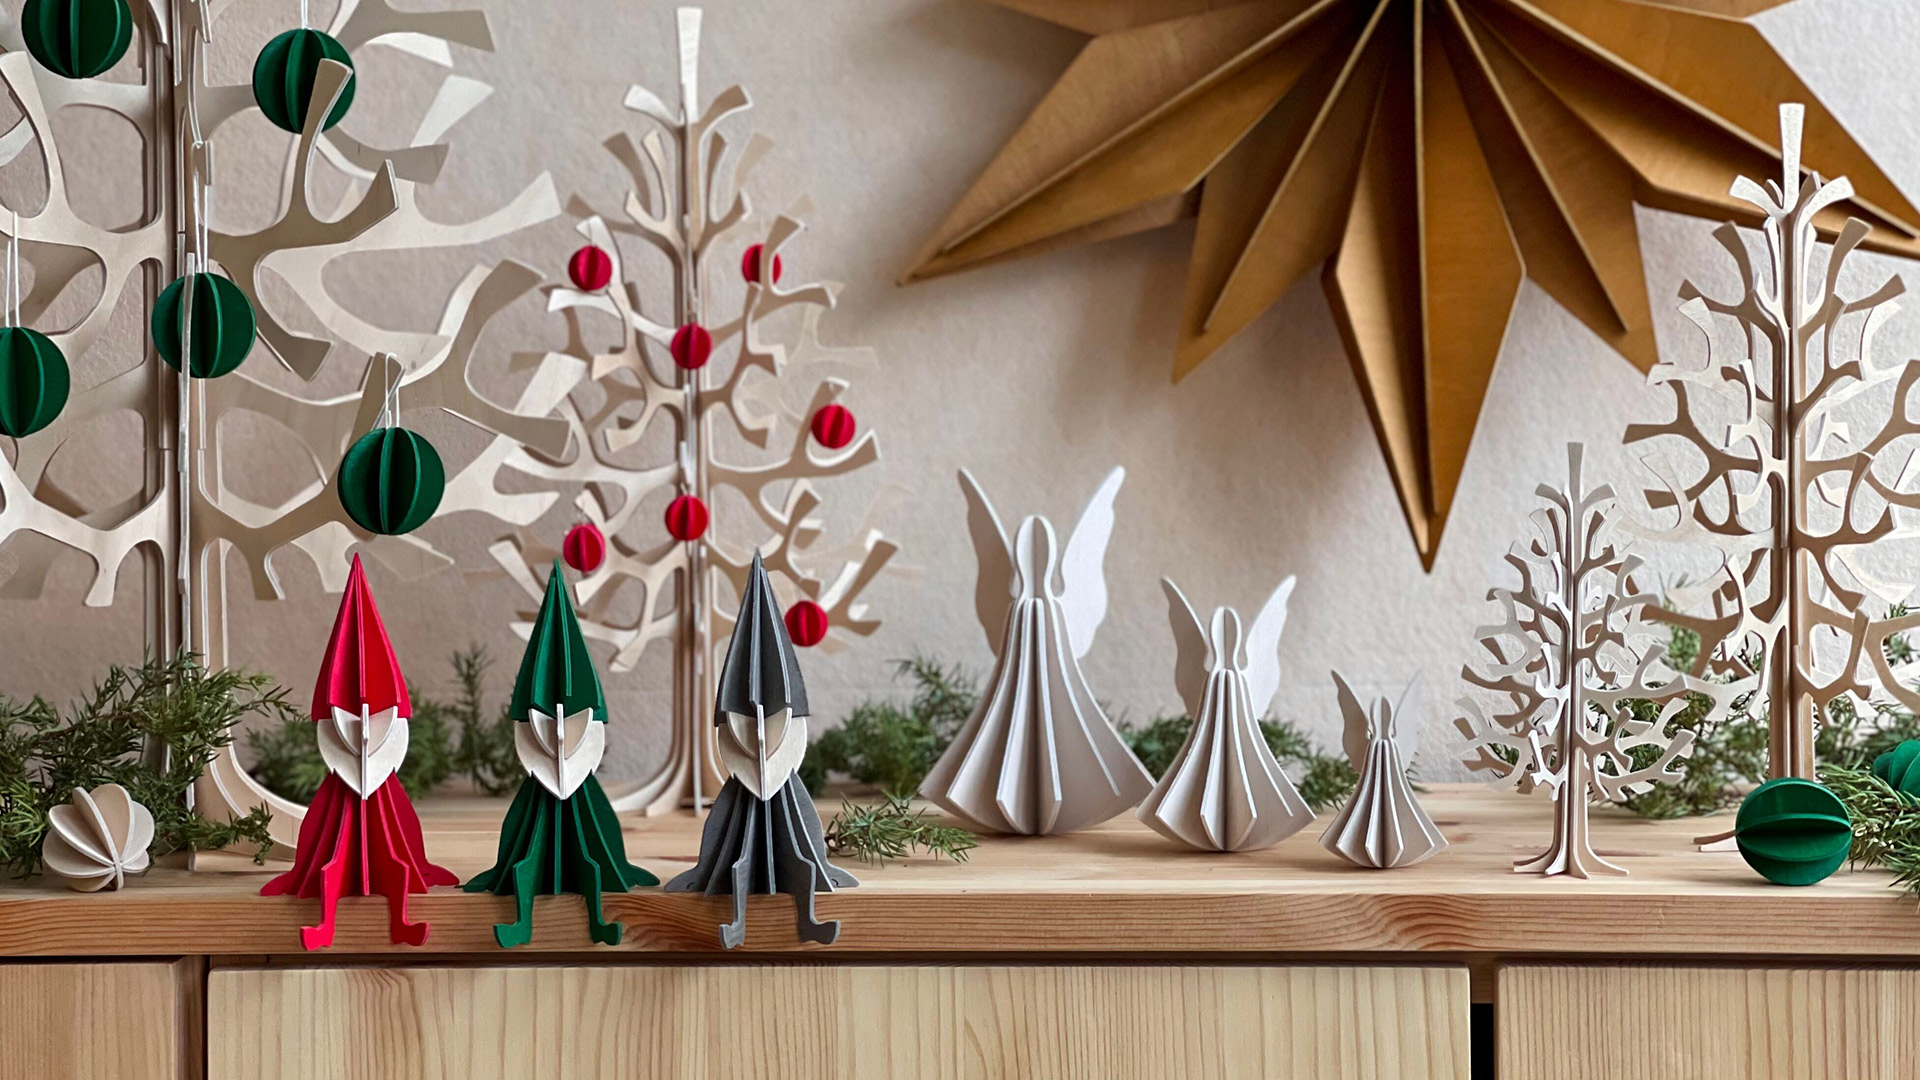 Wooden Lovi products on the sideboard, elves, angels, spruces and stars